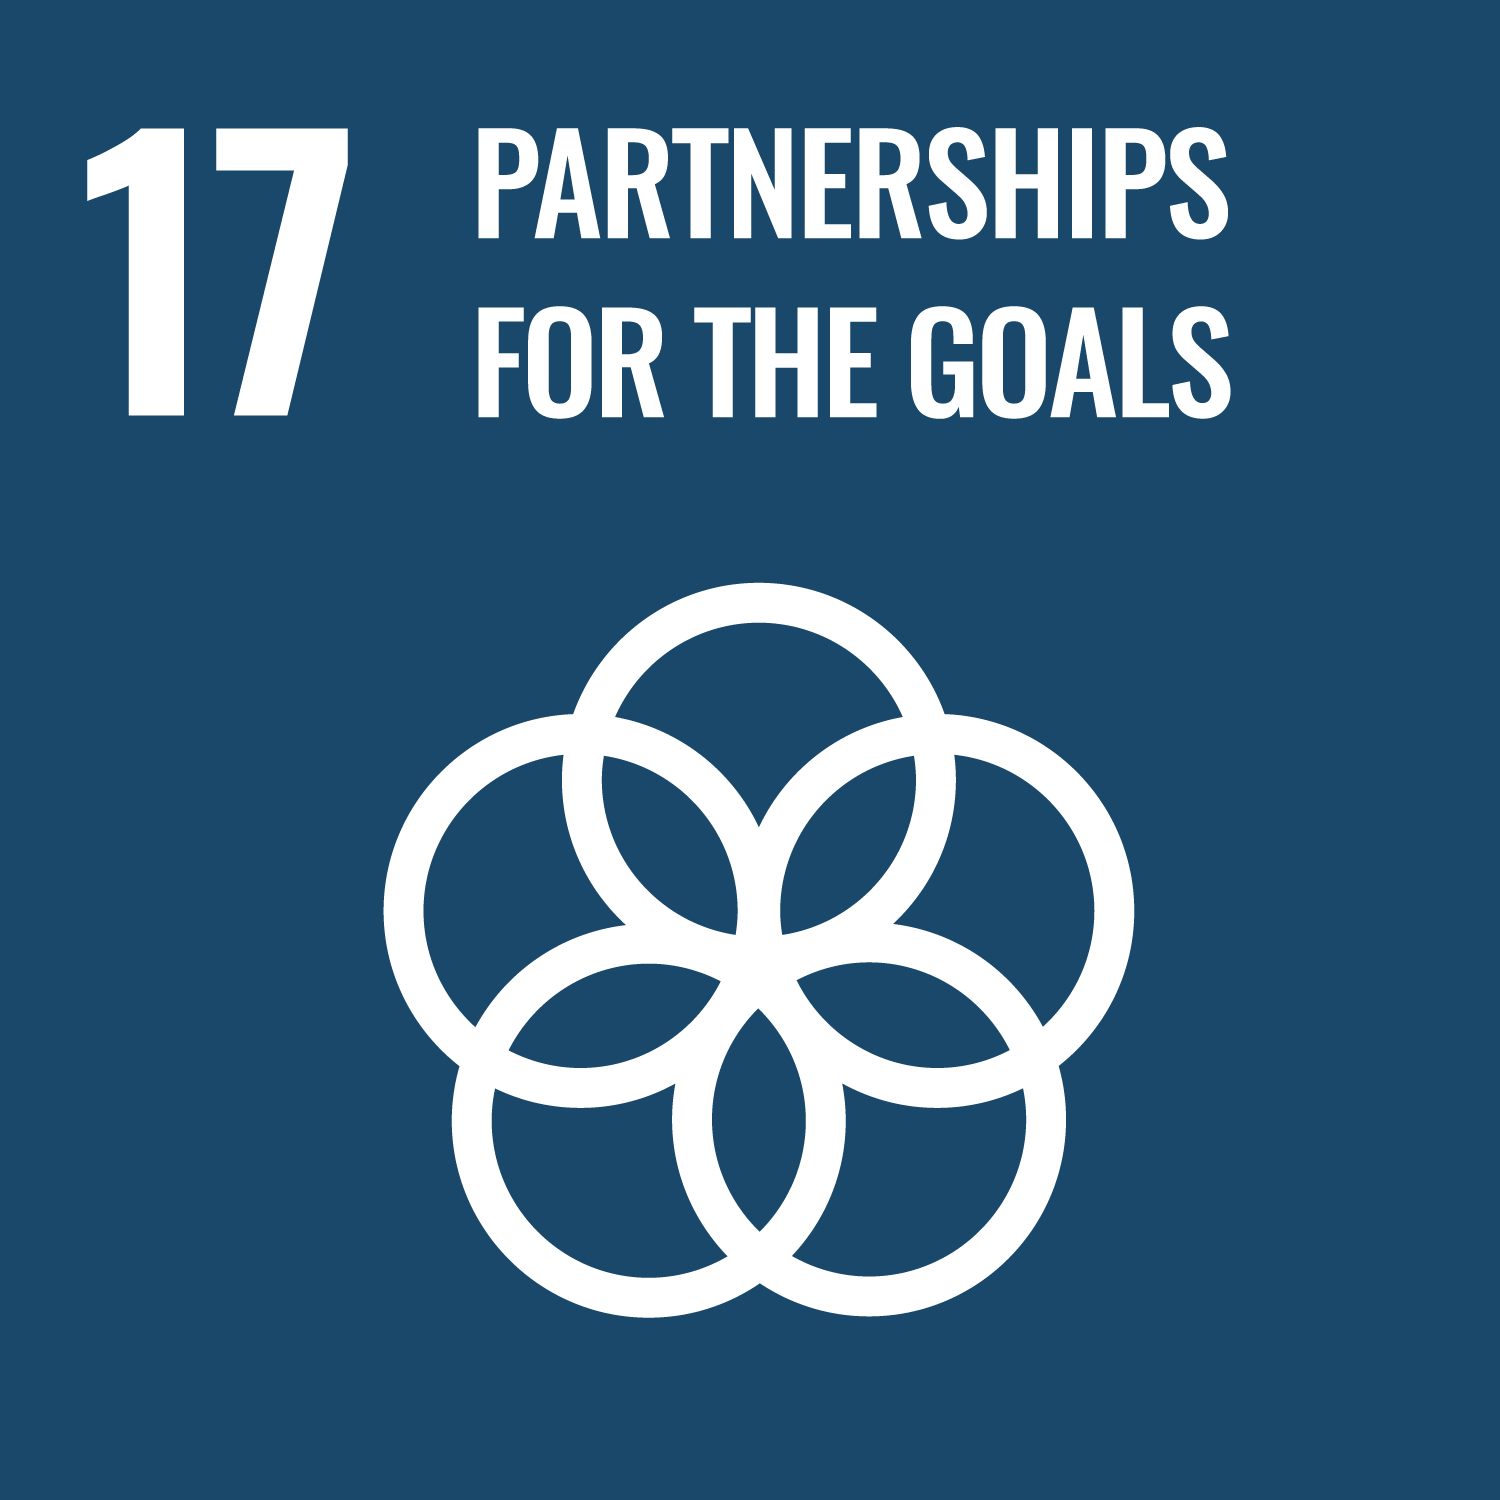 ICON FOR UN sustainable goal for partnerships